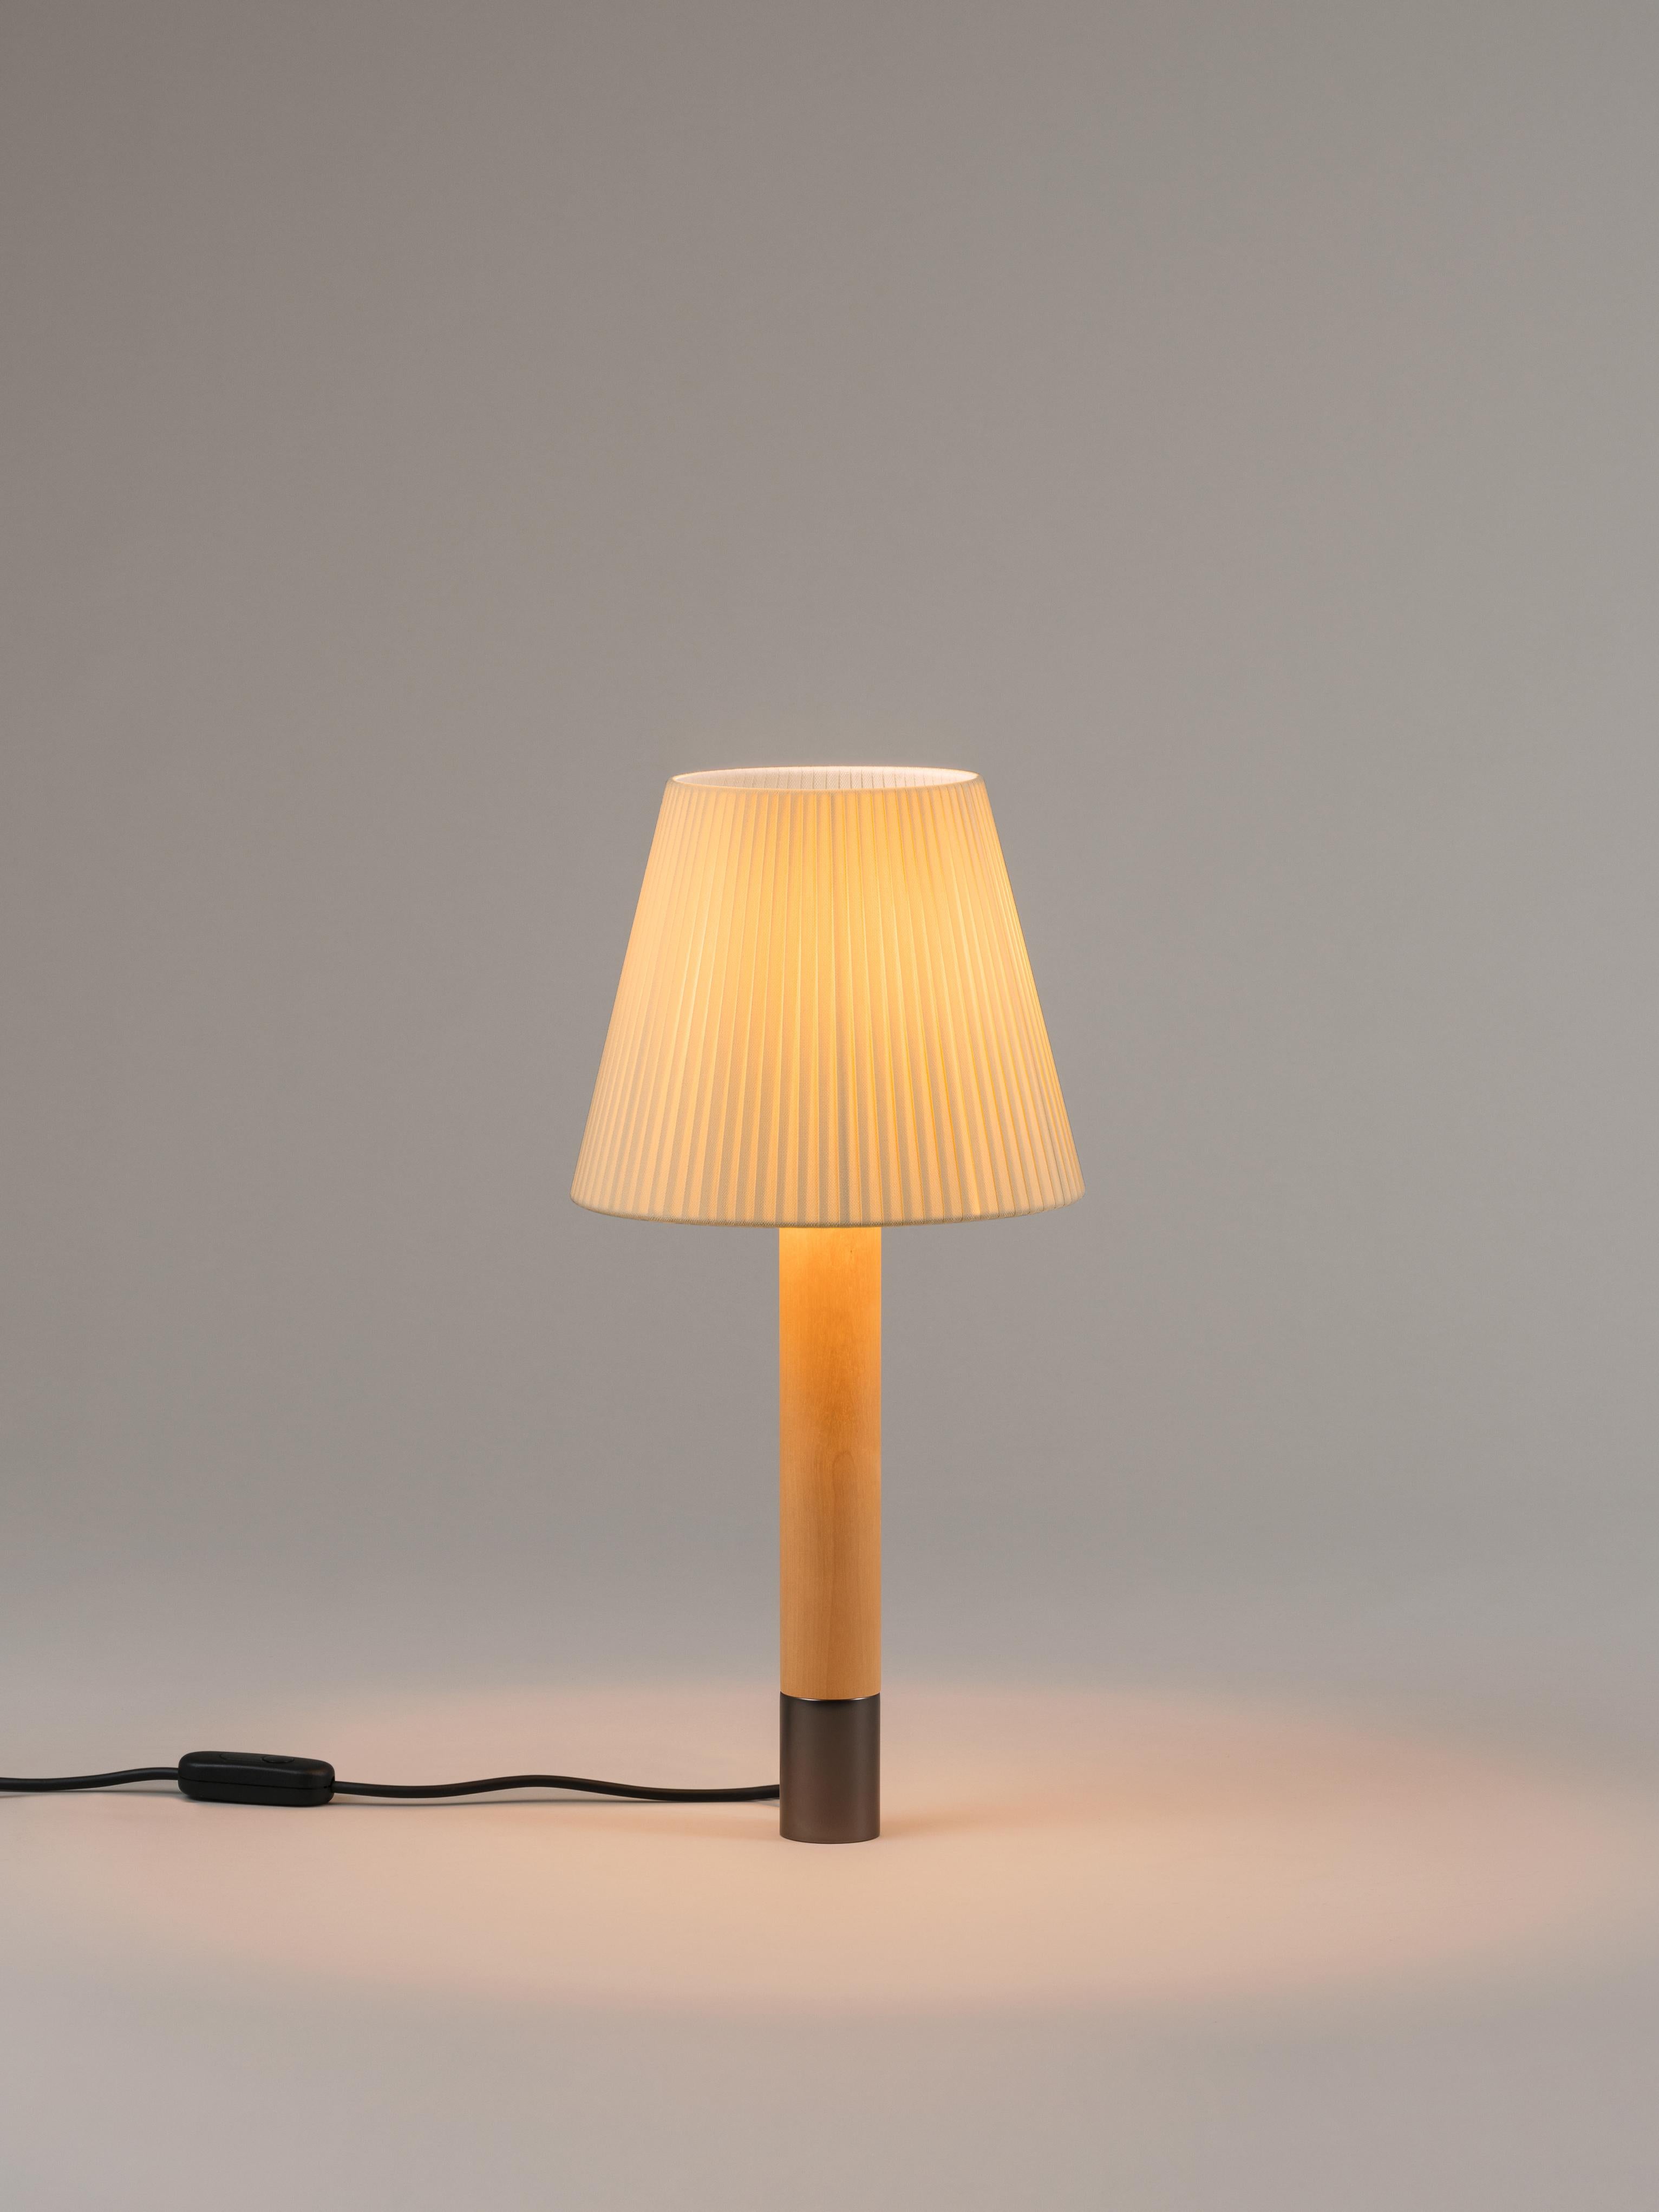 Bronze and Natural Básica M1 table lamp by Santiago Roqueta, Santa & Cole
Dimensions: D 25 x H 52 cm
Materials: bronze, birch wood, paperboard.
Available in other shade colors and with or without the stabilizing disc.
Available in nickel or